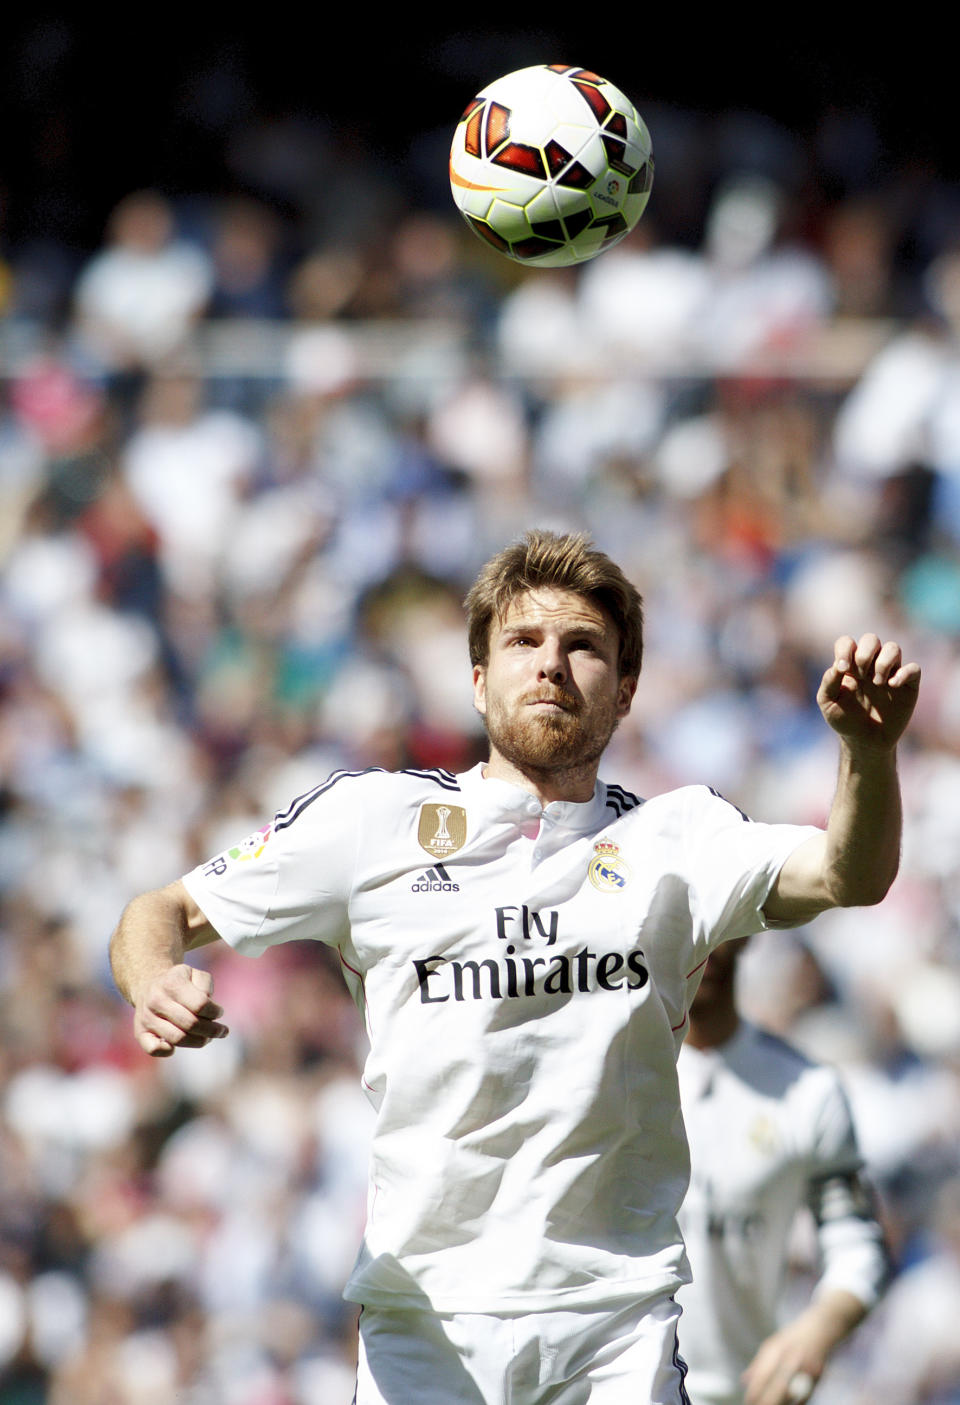 SPAIN, Madrid:Real Madrid's Spanish midfielder Asier Illarramendi during the Spanish League 2014/15 match between Real Madrid and Eibar, at Santiago Bernabeu Stadium in Madrid on April 11, 2015. (Photo by Guillermo Martinez/DPI/NurPhoto) (Photo by Guillermo Martinez/NurPhoto) (Photo by NurPhoto/NurPhoto via Getty Images)